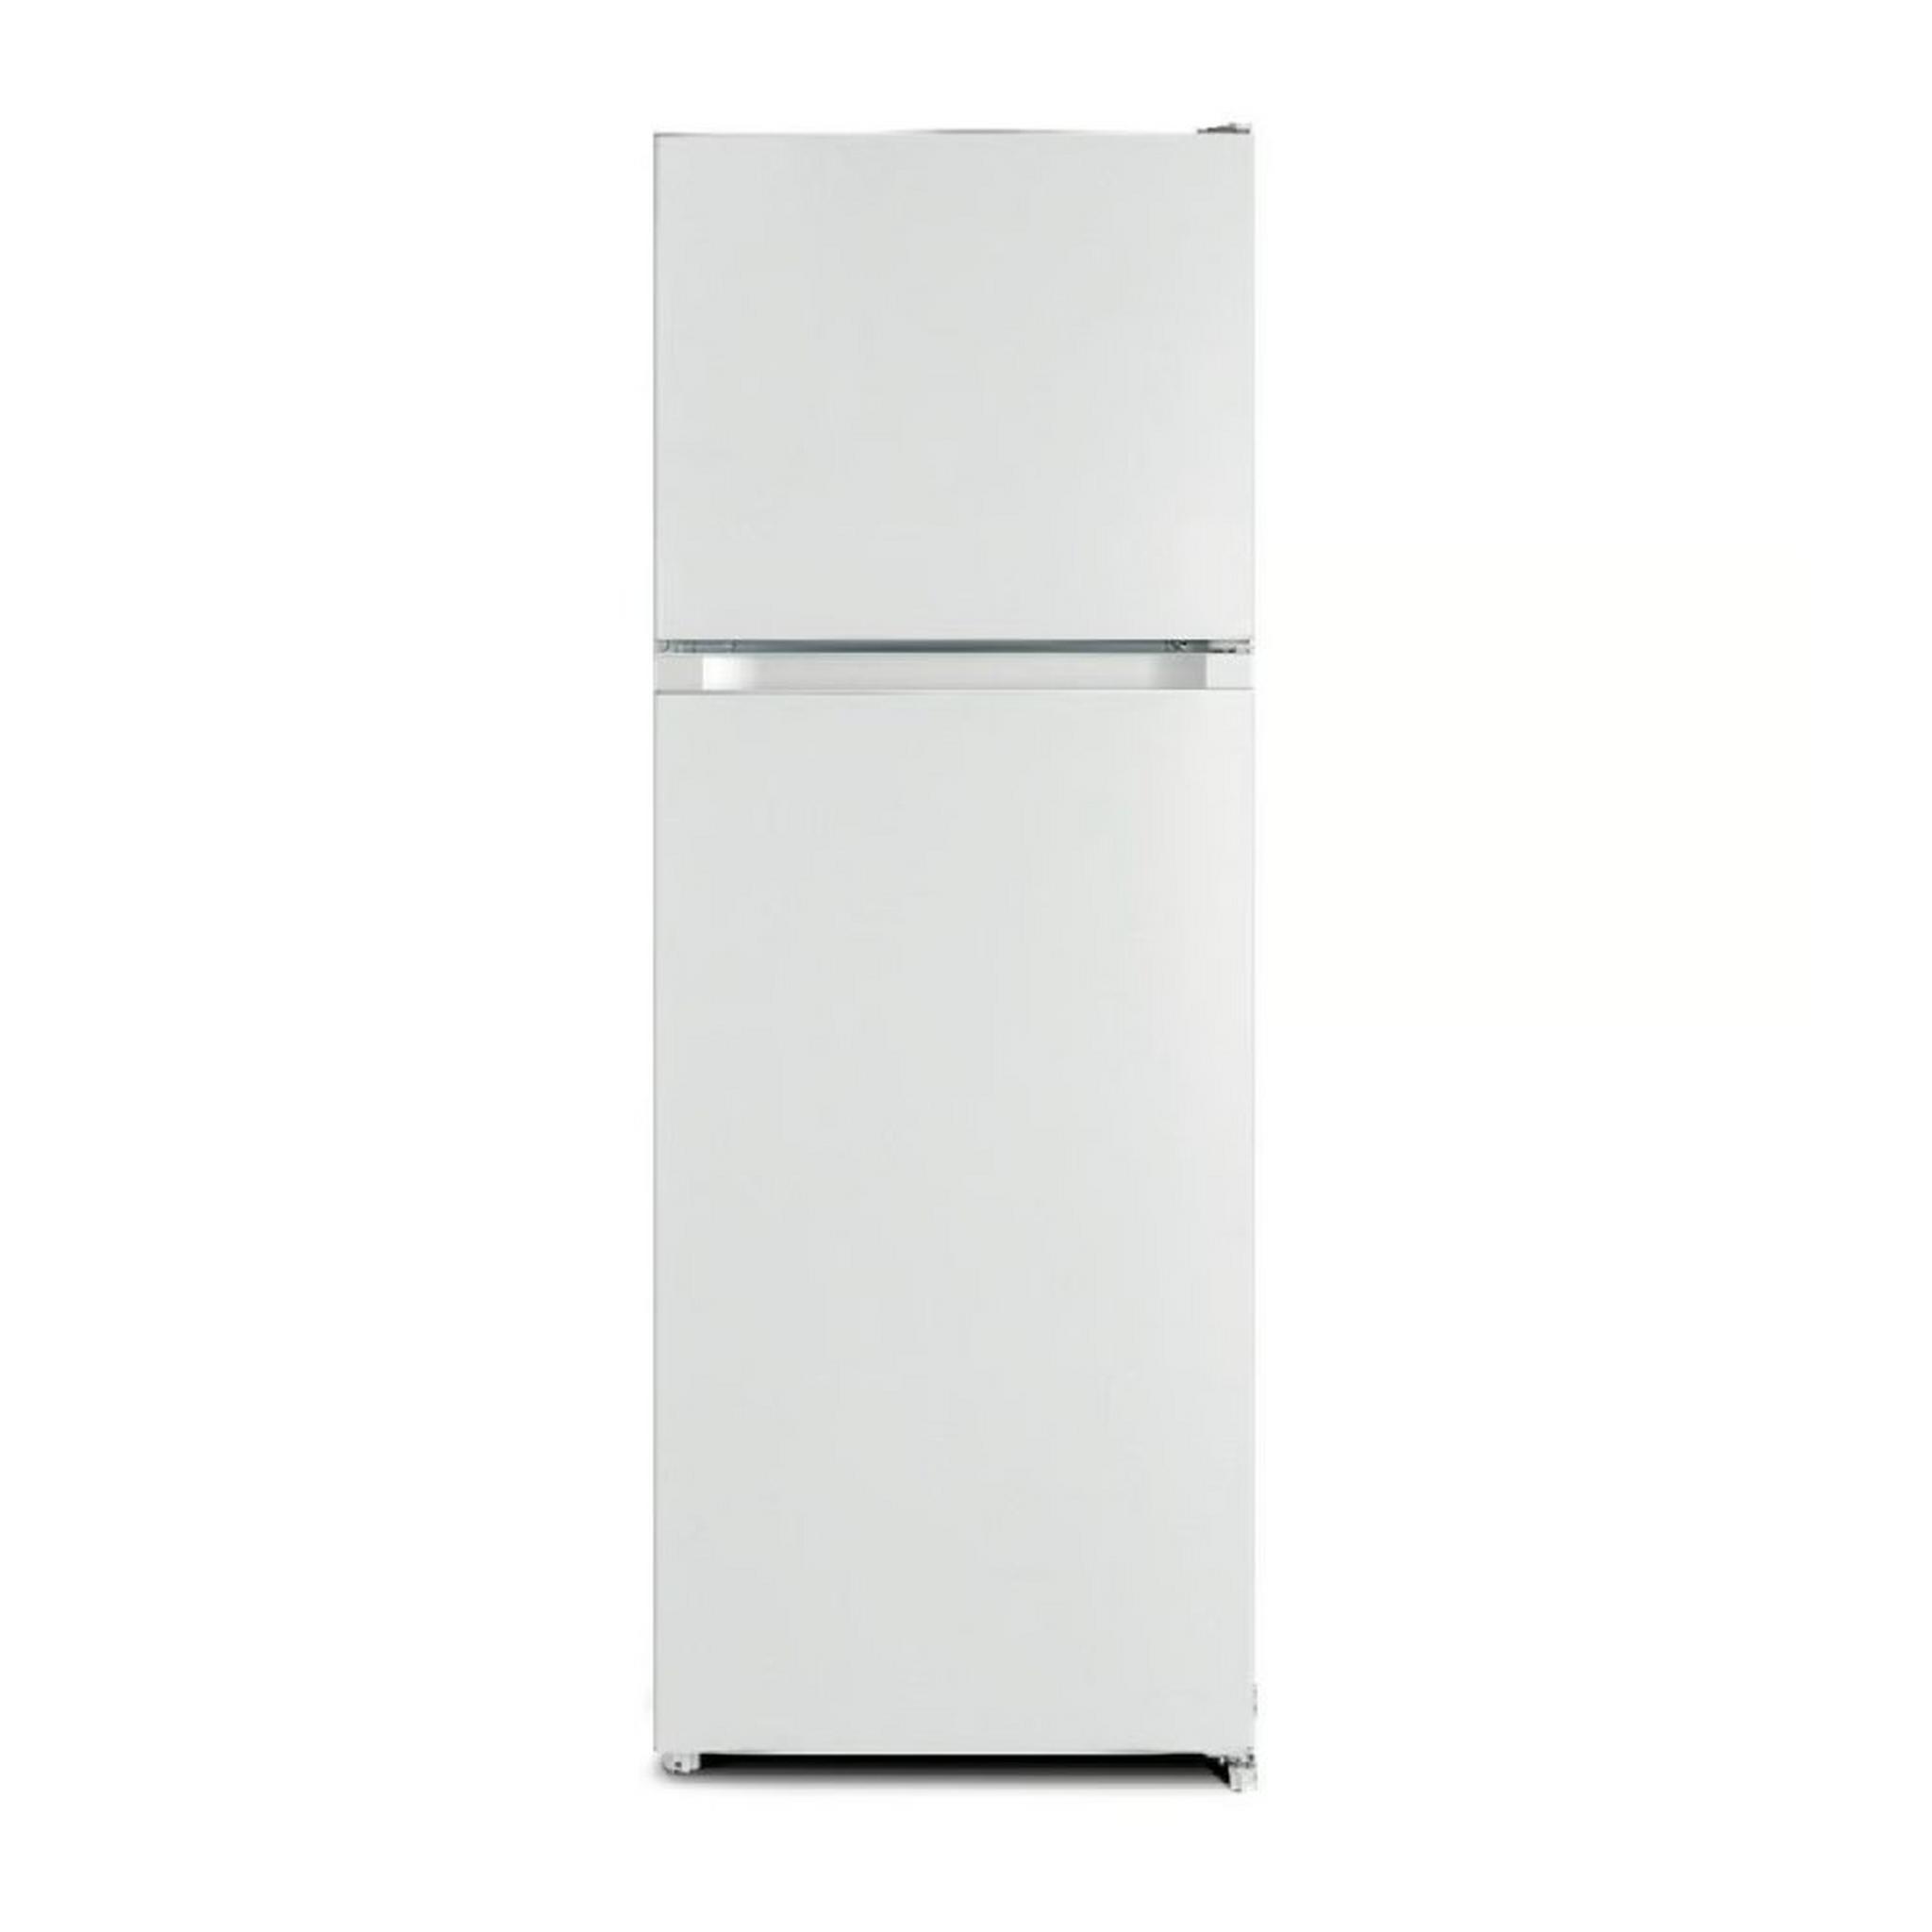 HAIER Refrigerator Top Freezer, 13.7CFT, White + Cooker Gas, 70.15 Liters, Stainless Steel + Front Load Washer, 8 KG, White Bundle, 387WH+HW80+HCR6060